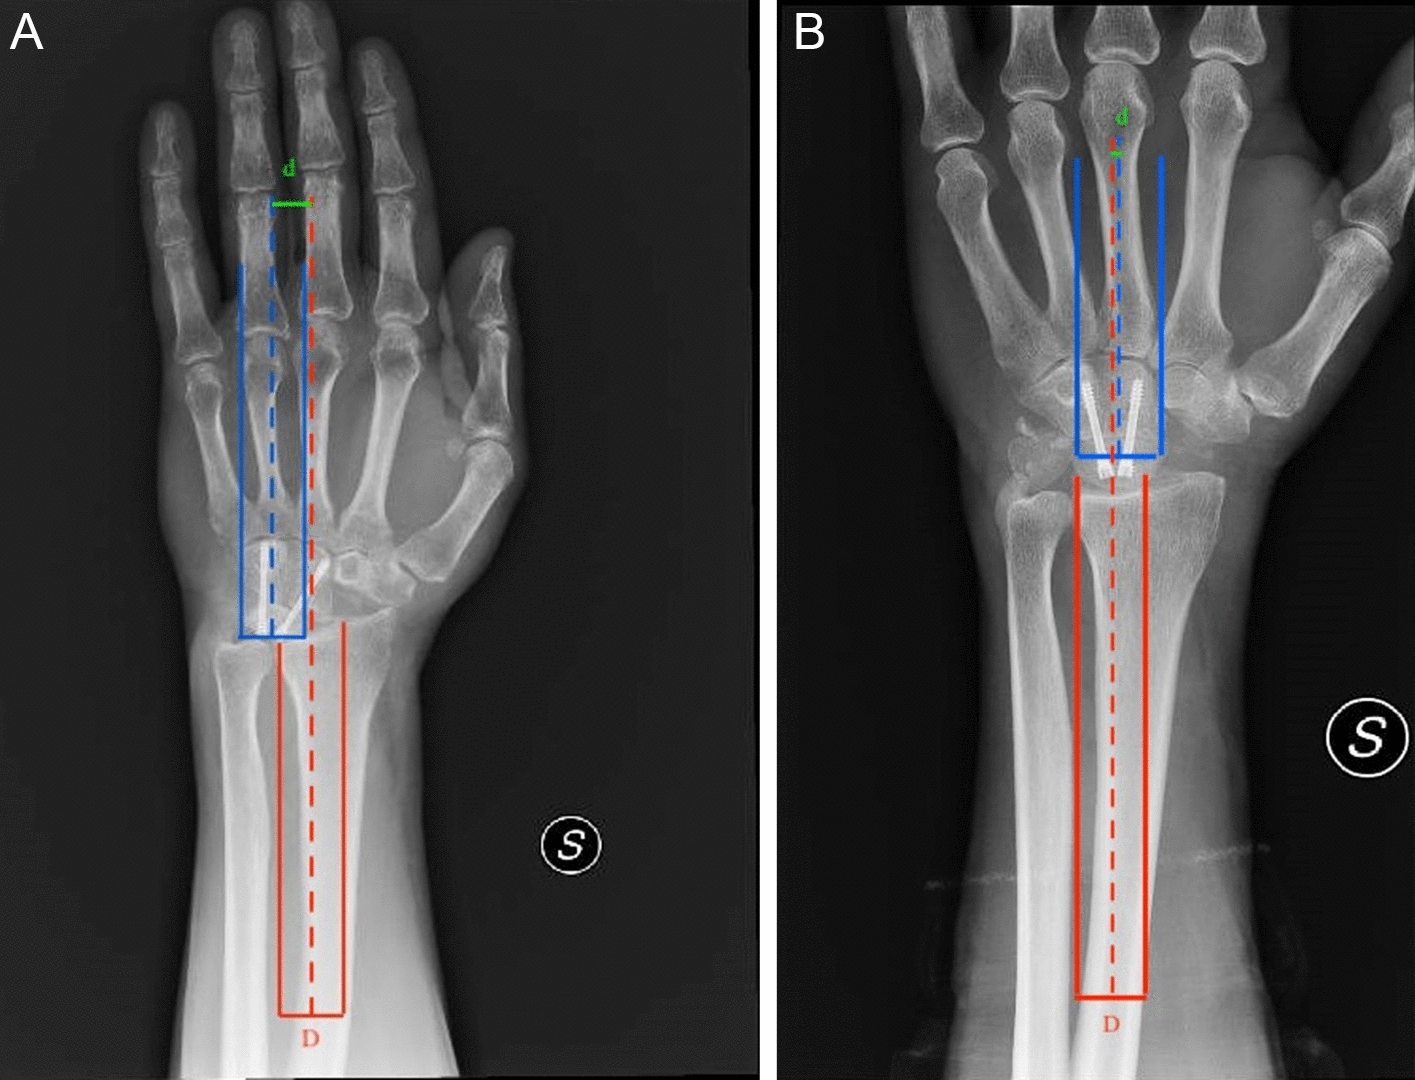 Lunate Shift Index (LSI): A New Parameter for the Evaluation of Residual Ulnar Side Wrist Pain in Patients with Wrist Osteoarthritis Undergoing Three-Corners Arthrodesis vs. Four-Corners Arthrodesis—A Retrospective Comparative Study with Minimum 2 Years of Follow-up